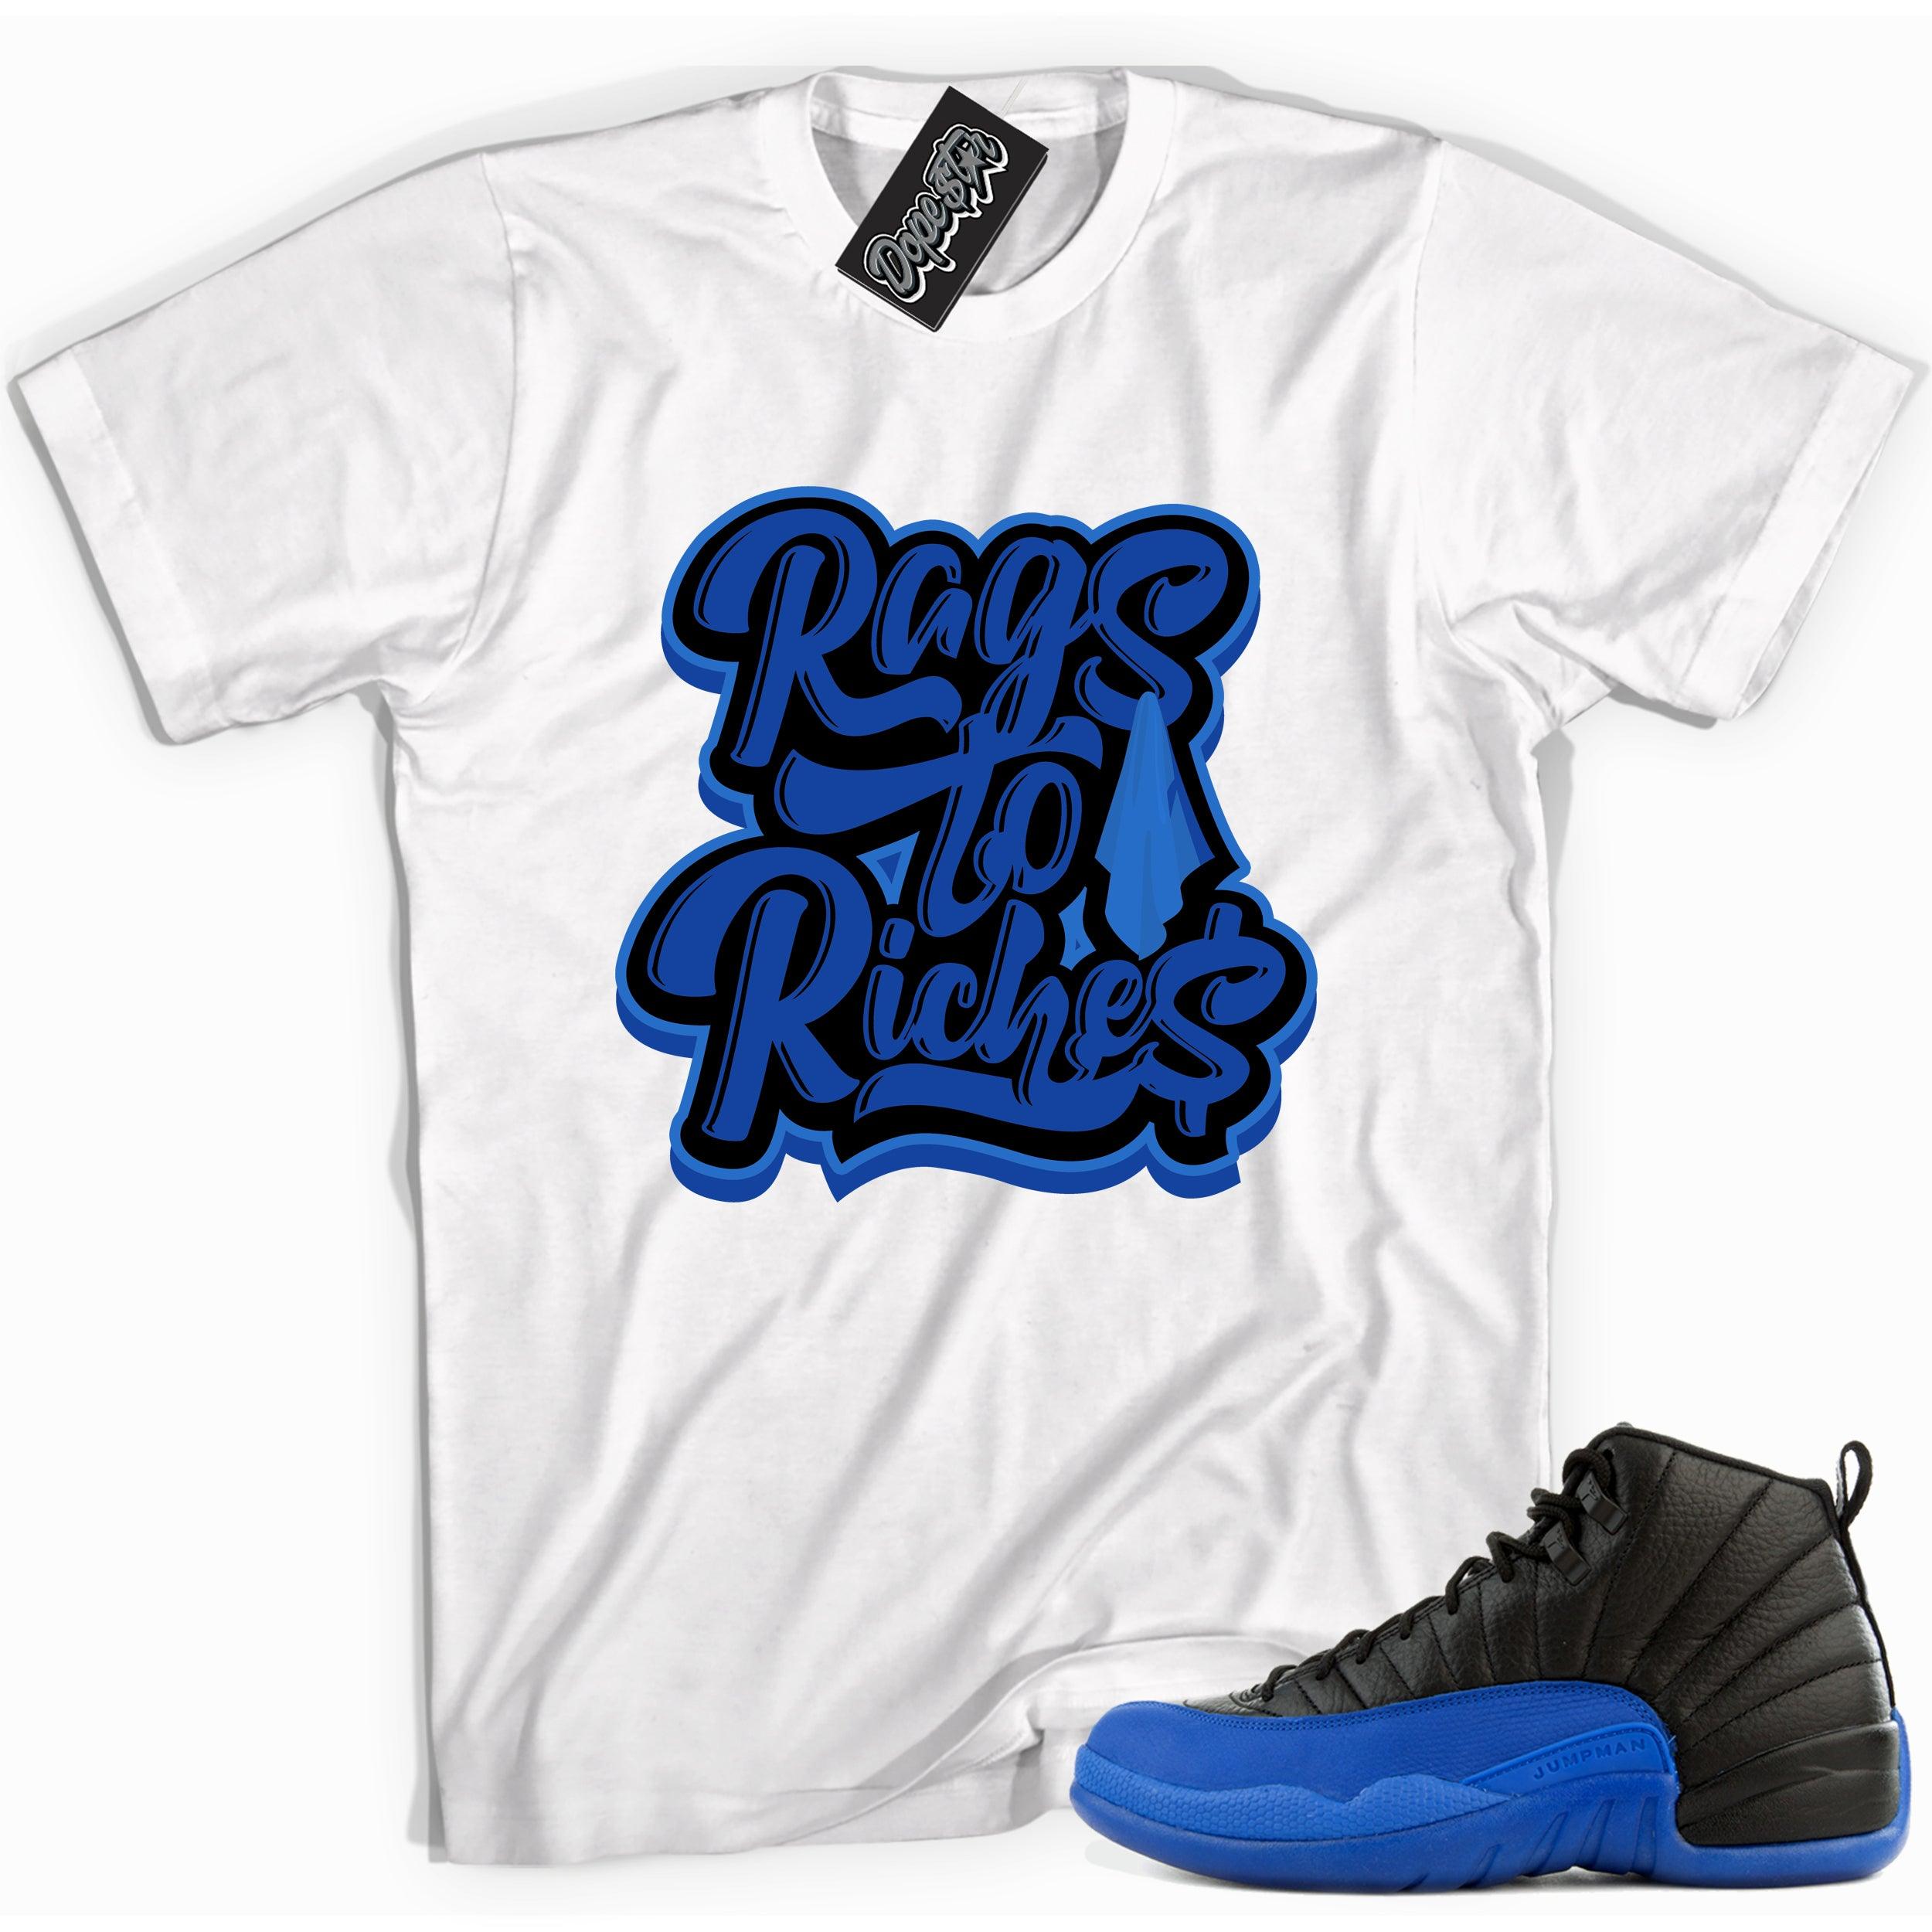 Cool white graphic tee with 'rags to riches' print, that perfectly matches Air Jordan 12 Retro Black Game Royal sneakers.